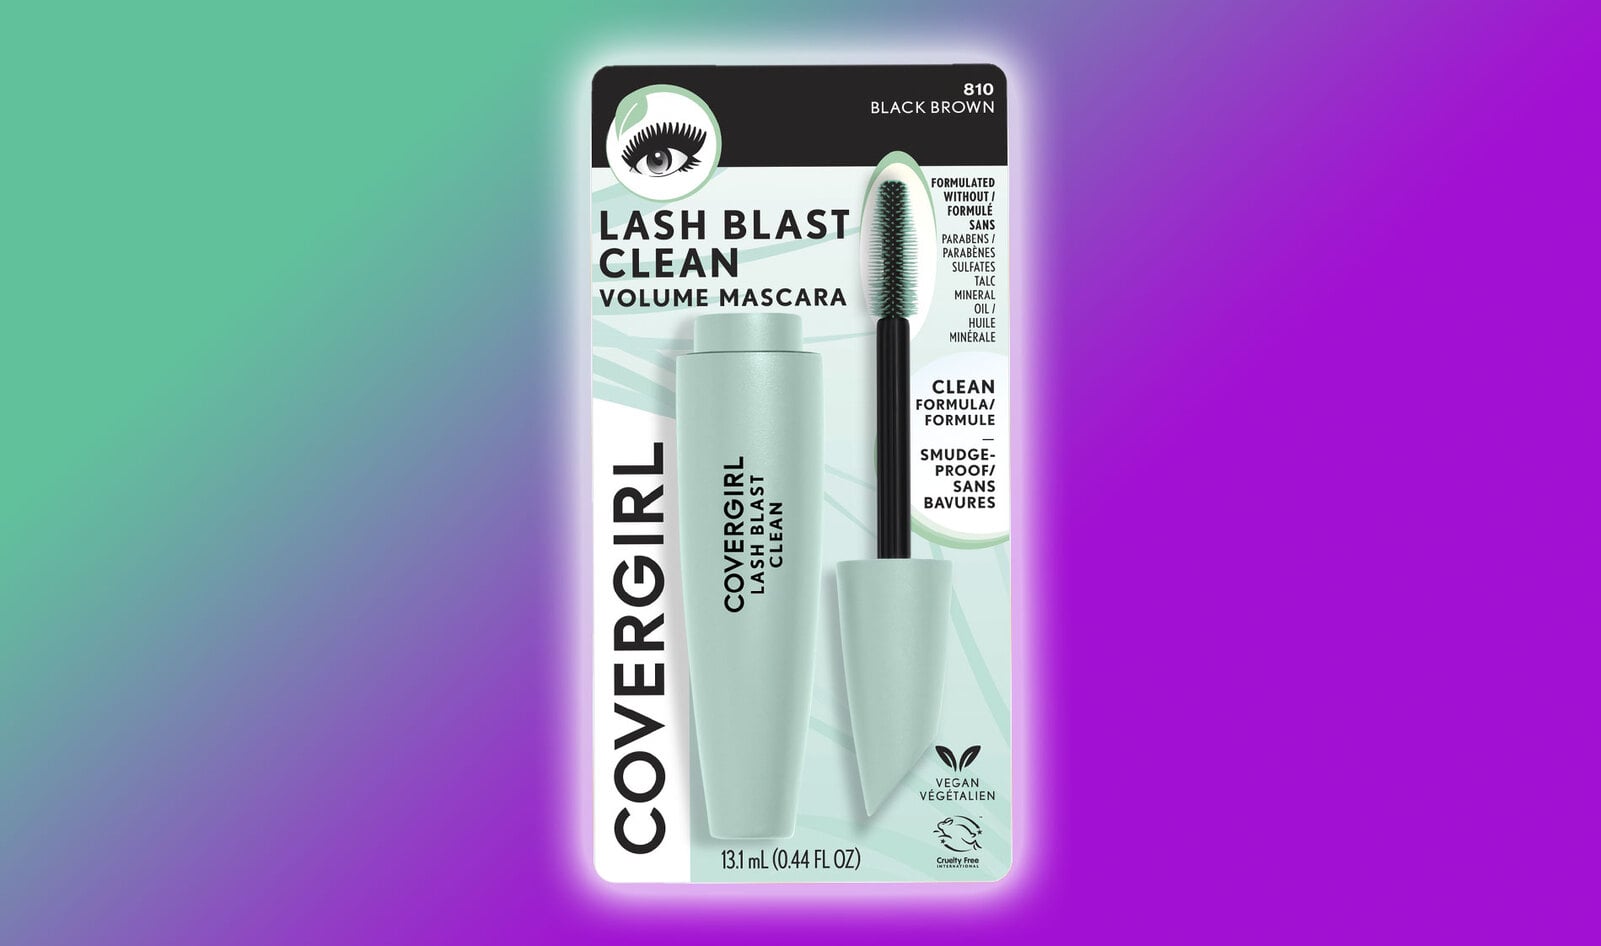 Cover Girl Launches Its First Vegan Mascara at Target